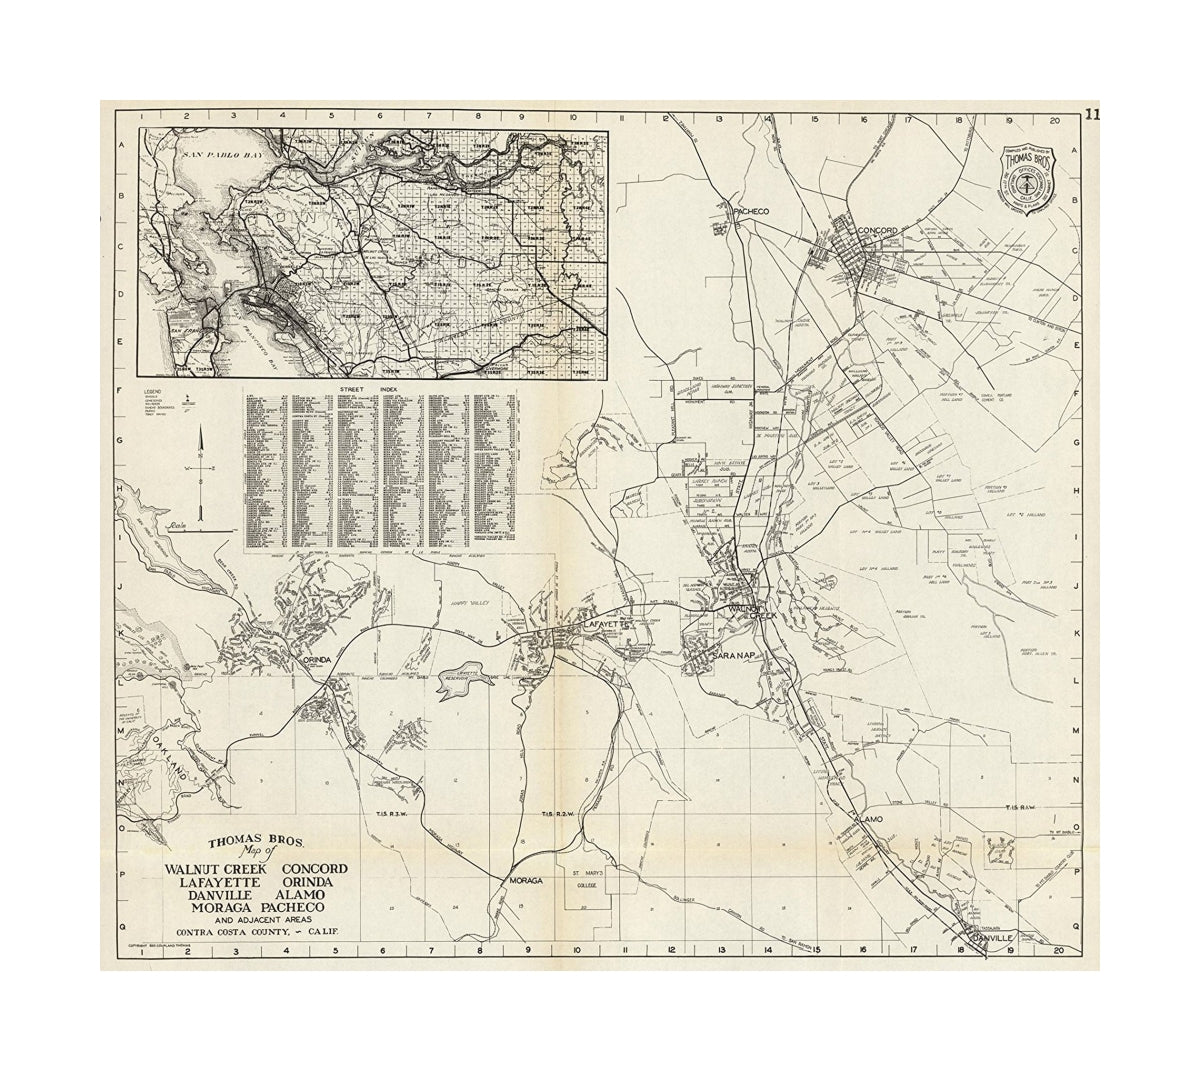 Thomas Bros Walnut Creek, Concord, Lafayette, Orinda, Danville, Alamo, Moraga, Pacheco, and Adjacent Areas., Thomas Bros. Recreational and Statistical Atlas, California., Title is from the cover. There is no title page. Date is estimated. 1st "road" atla